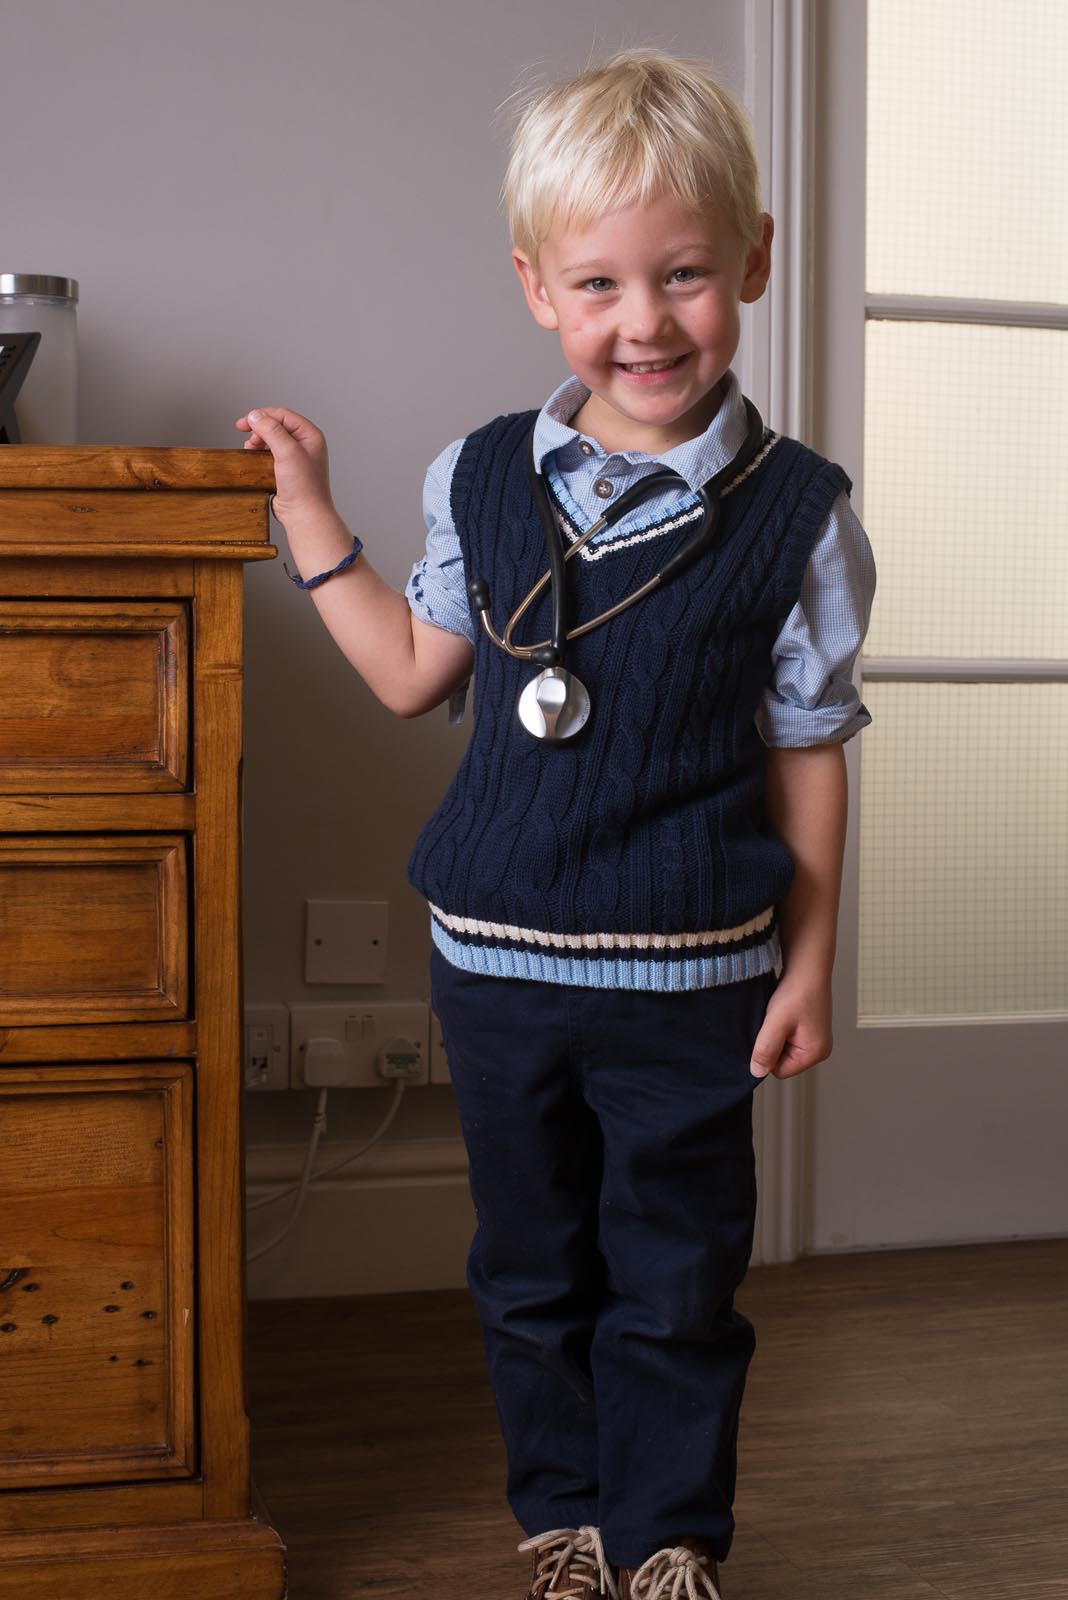 Young boy playing doctor and grinning with a stethoscope around his neck